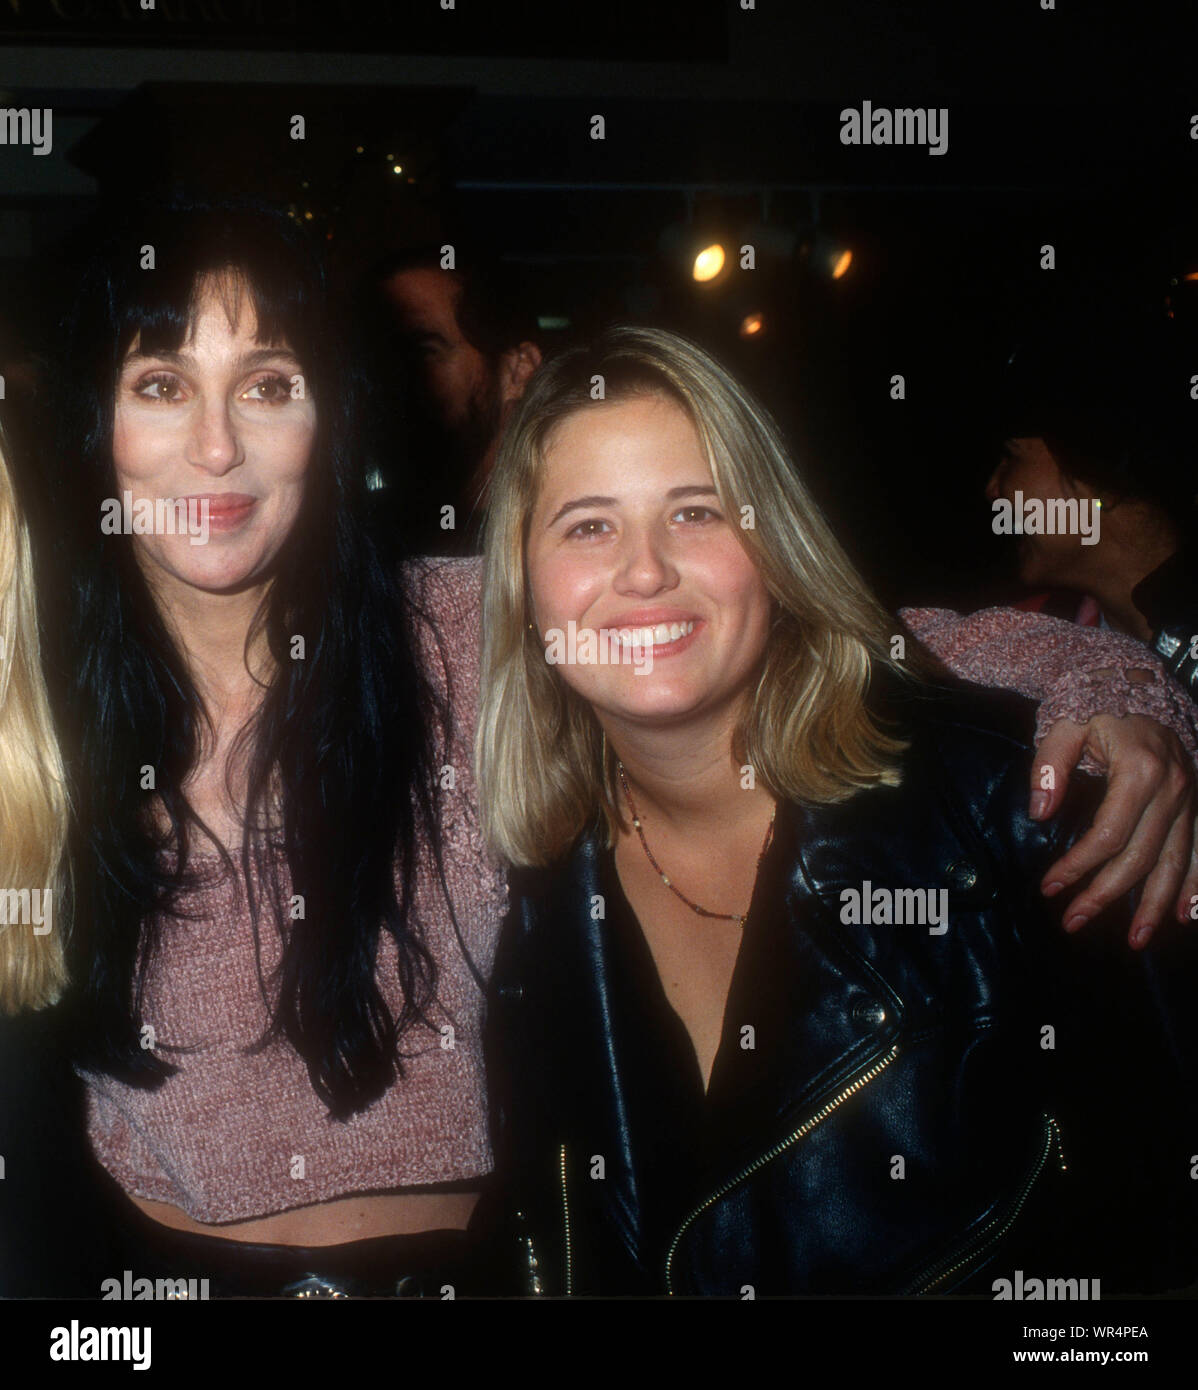 Beverly Hills, California, USA 4th December 1994 Singer/actress Cher and daughter Chastity Bono attend 'Happy Harley Days/Rejoice on Rodeo' Parade on December 4, 1994 in Beverly Hills, California, USA. Photo by Barry King/Alamy Stock Photo Stock Photo